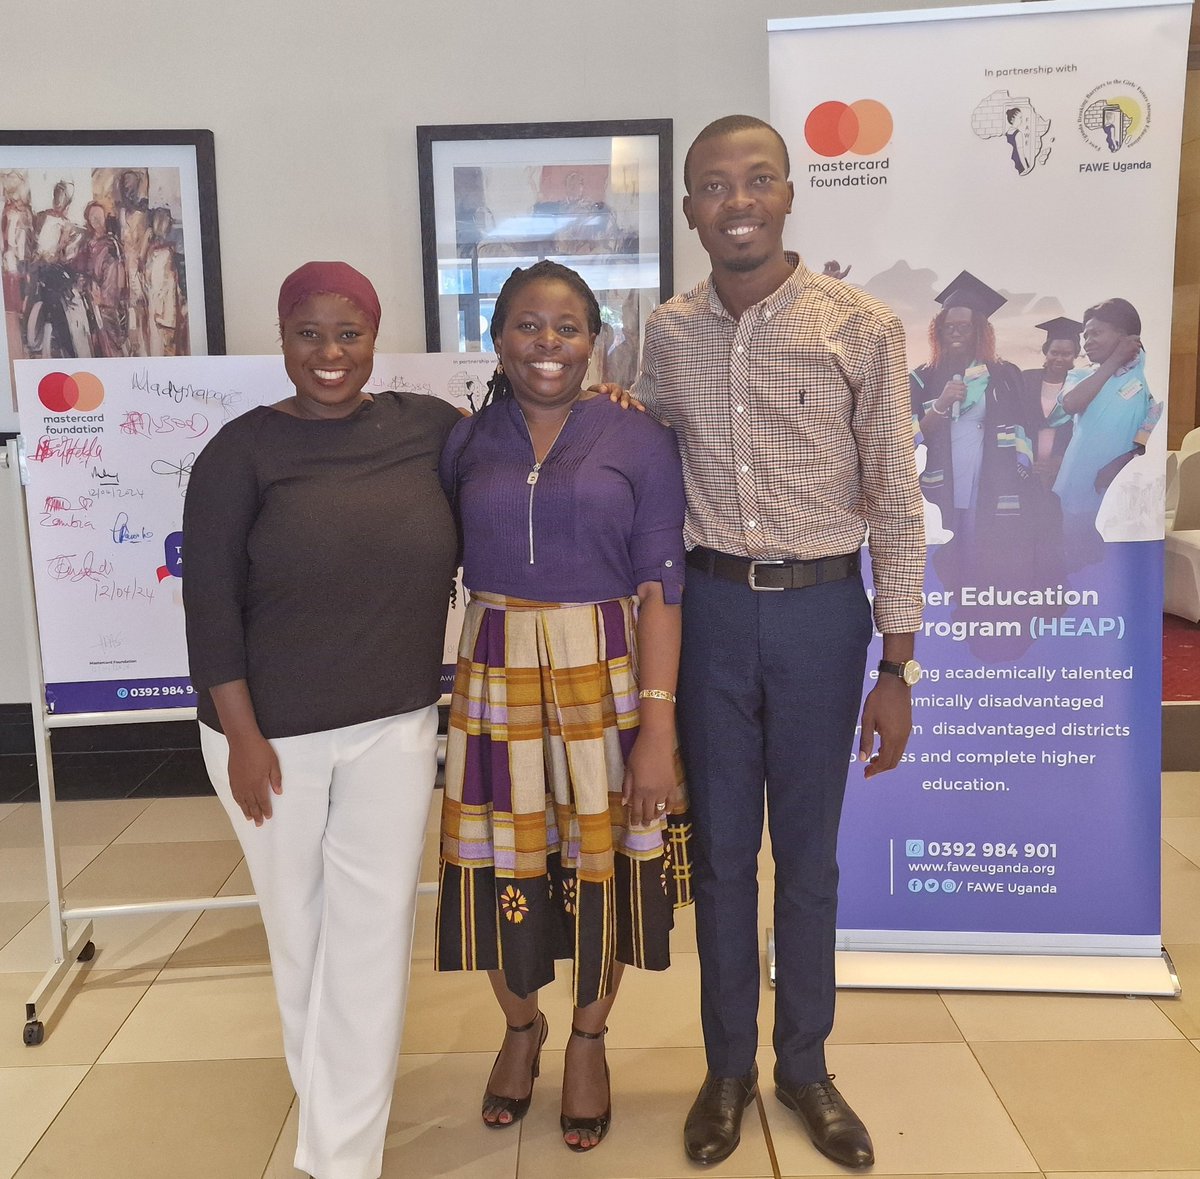 Exciting news from Kampala, @Uganda! @RsFawe & @FAWEUganda in partnership with @MastercardFdn, launched an innovative program to create new pathways into #higher #education for #young #people #across 10 #African countries. @DensuAssoc is excited to be a learning partner!